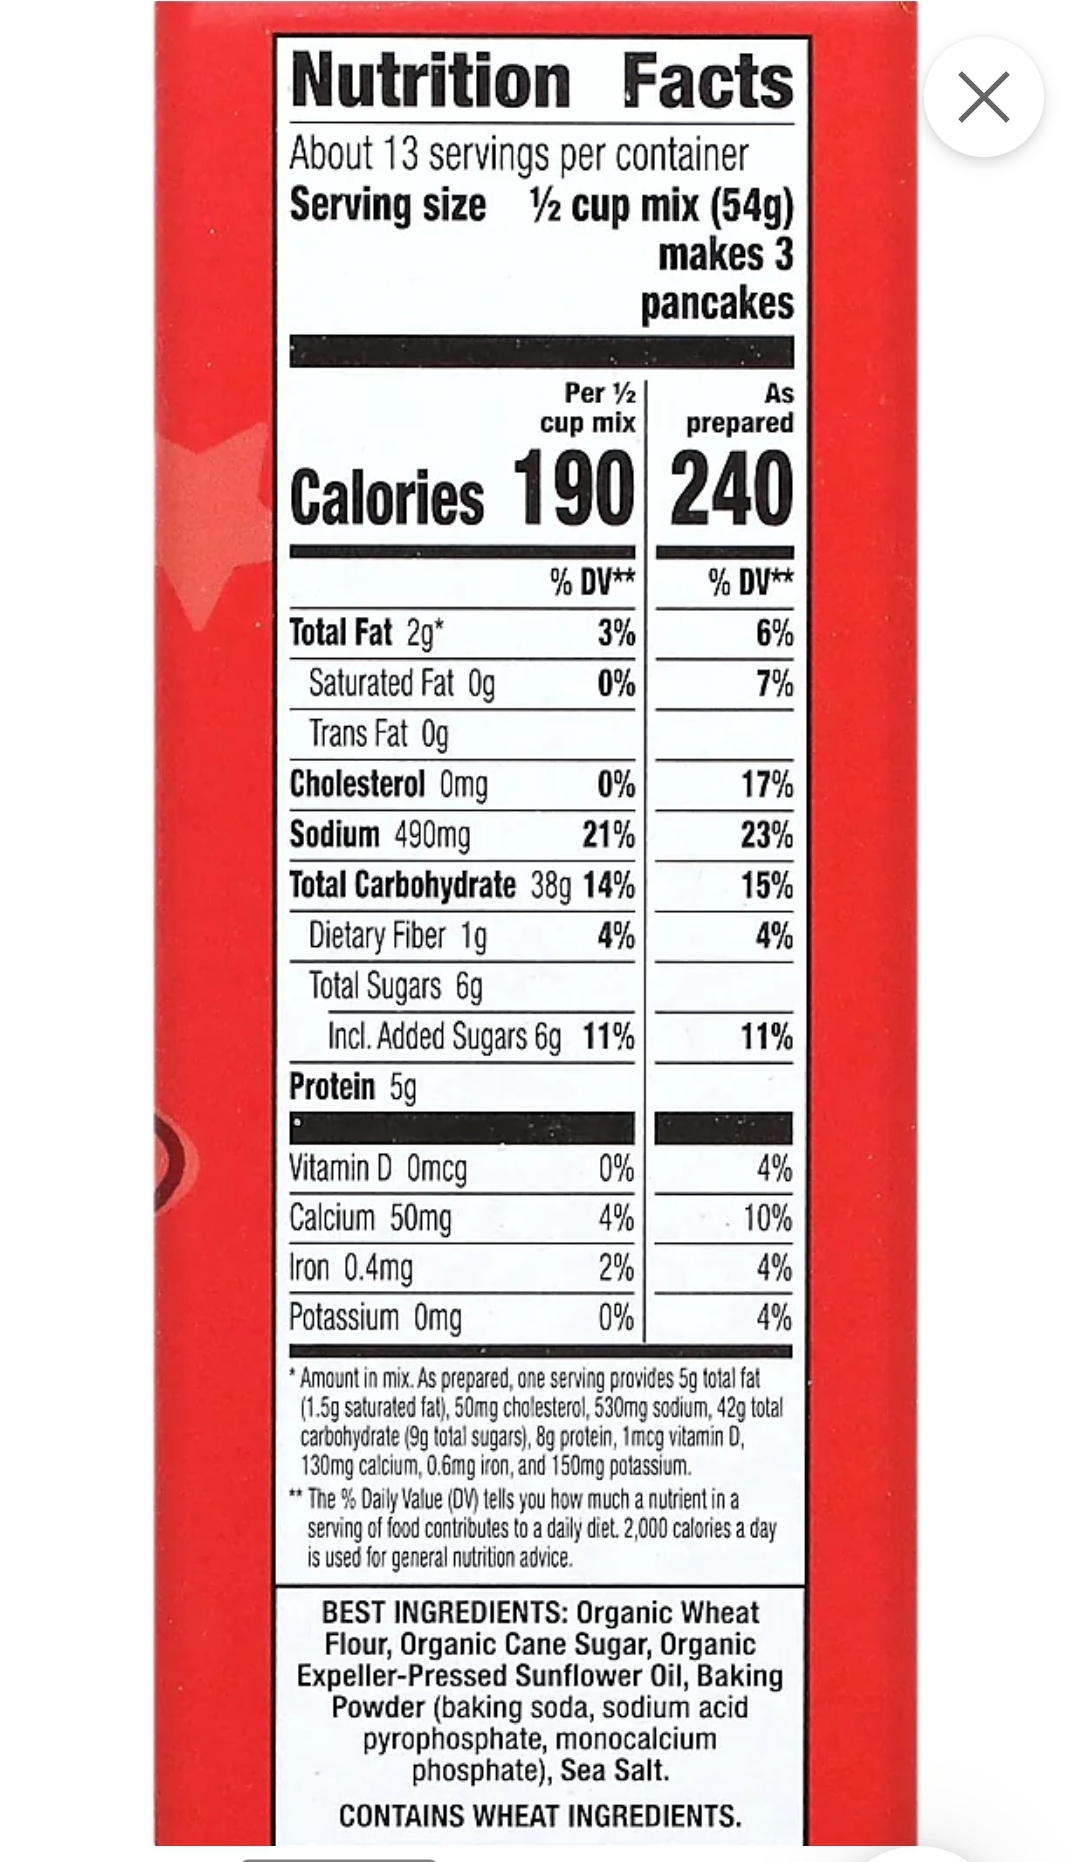 Nutrition Facts
About 13 servings per container
Serving size ½ cup mix (54g)
makes 3
pancakes
As
prepared
Calories 190 240
Total Fat 29*
Per 12
cup mix
Protein 5g
Saturated Fat Og
Trans Fat Og
Cholesterol Omg
0%
Sodium 490mg
21%
Total Carbohydrate 38g 14%
Dietary Fiber 1g
4%
Total Sugars 6g
Incl. Added Sugars 6g 11%
Vitamin D Omcg
Calcium 50mg
Iron 0.4mg
Potassium Omg
% DV**
3%
0%
0%
4%
2%
0%
%DV**
6%
7%
17%
23%
15%
4%
11%
4%
10%
4%
4%
*Amount in mix. As prepared, one serving provides 5g total fat
(1.5g saturated fat), 50mg cholesterol, 530mg sodium, 42g total
carbohydrate (9g total sugars), 8g protein, 1mcg vitamin D,
130mg calcium, 0.6mg iron, and 150mg potassium.
**The % Daily Value (DV) tells you how much a nutrient in a
serving of food contributes to a daily diet. 2,000 calories a day
is used for general nutrition advice.
BEST INGREDIENTS: Organic Wheat
Flour, Organic Cane Sugar, Organic
Expeller-Pressed Sunflower Oil, Baking
Powder (baking soda, sodium acid
pyrophosphate, monocalcium
phosphate), Sea Salt.
CONTAINS WHEAT INGREDIENTS.
X